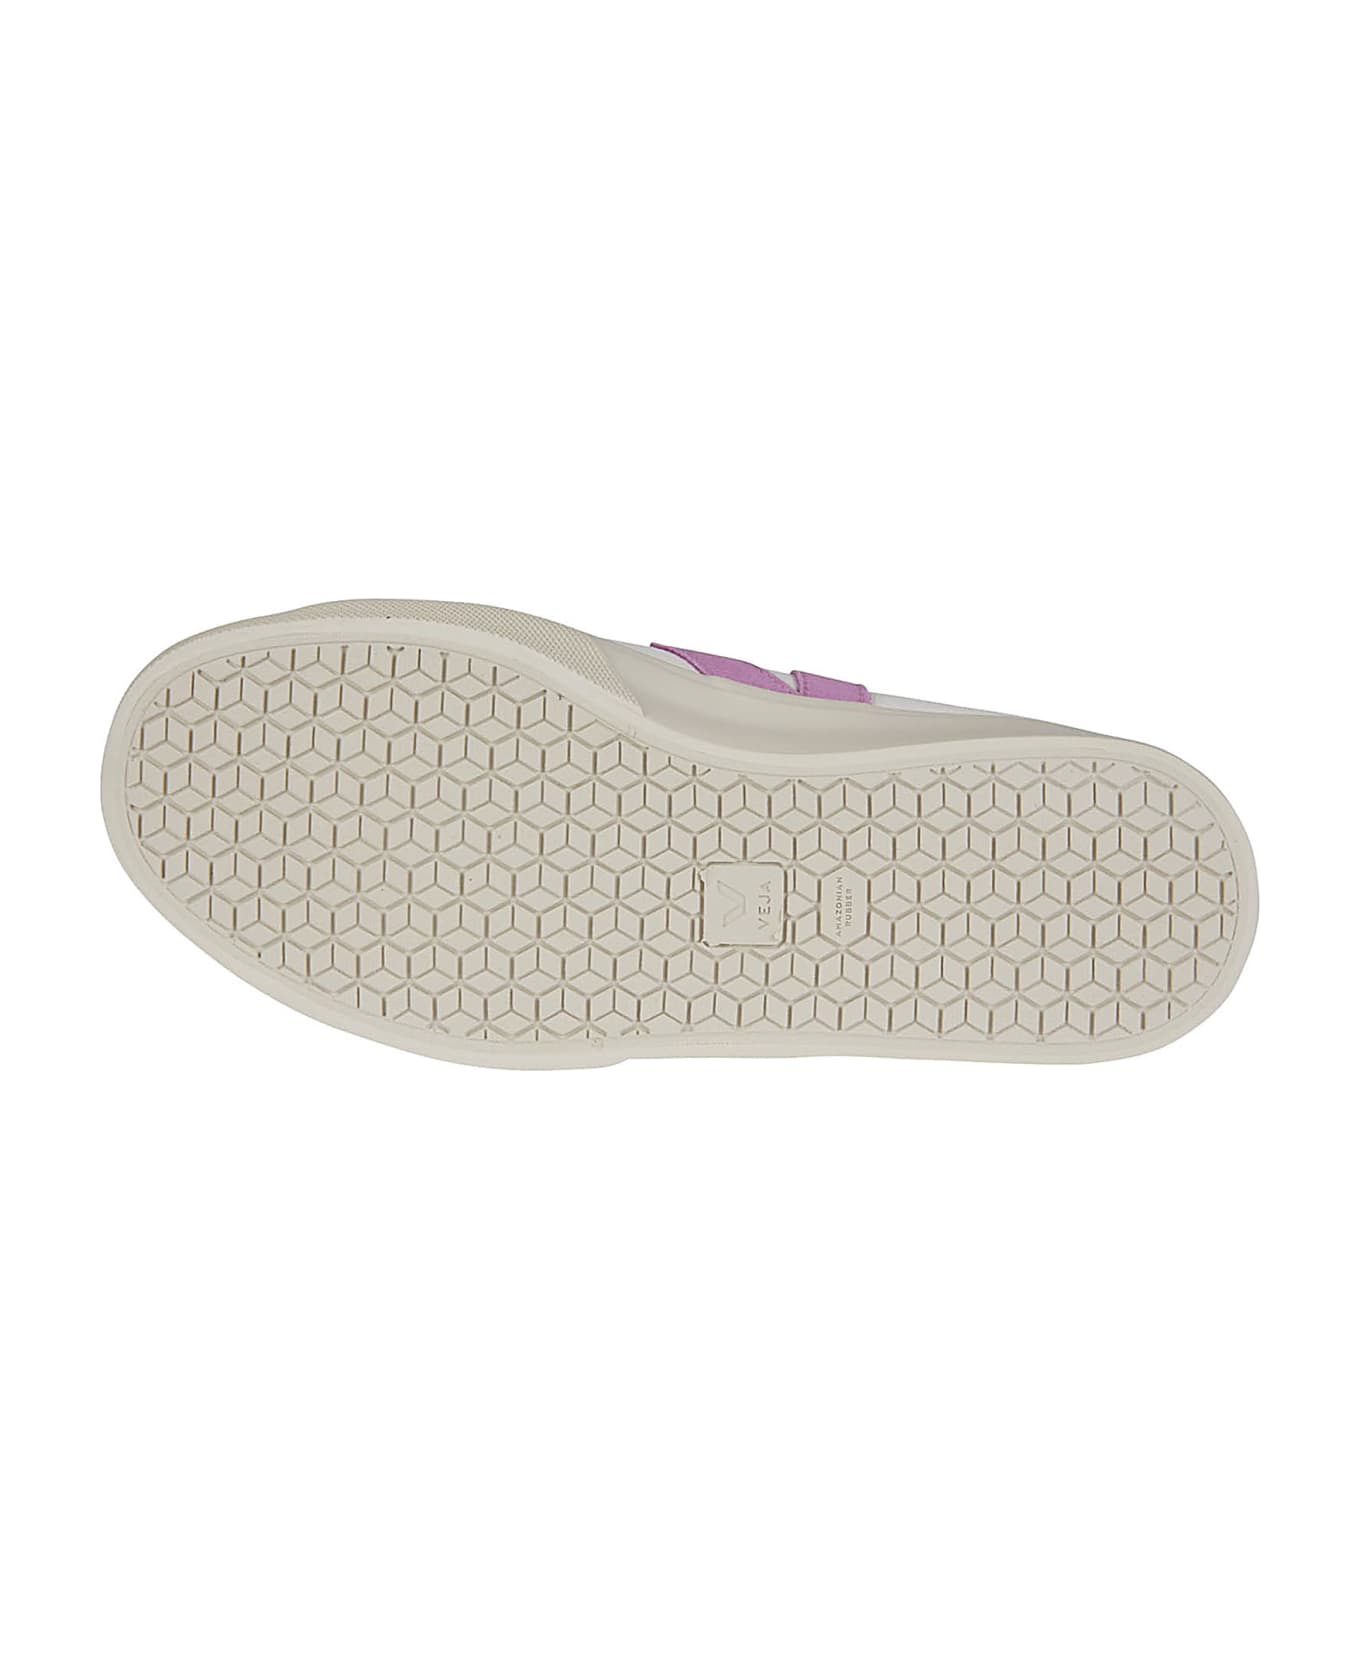 Veja Campo Sneakers - Extra White/mulberry